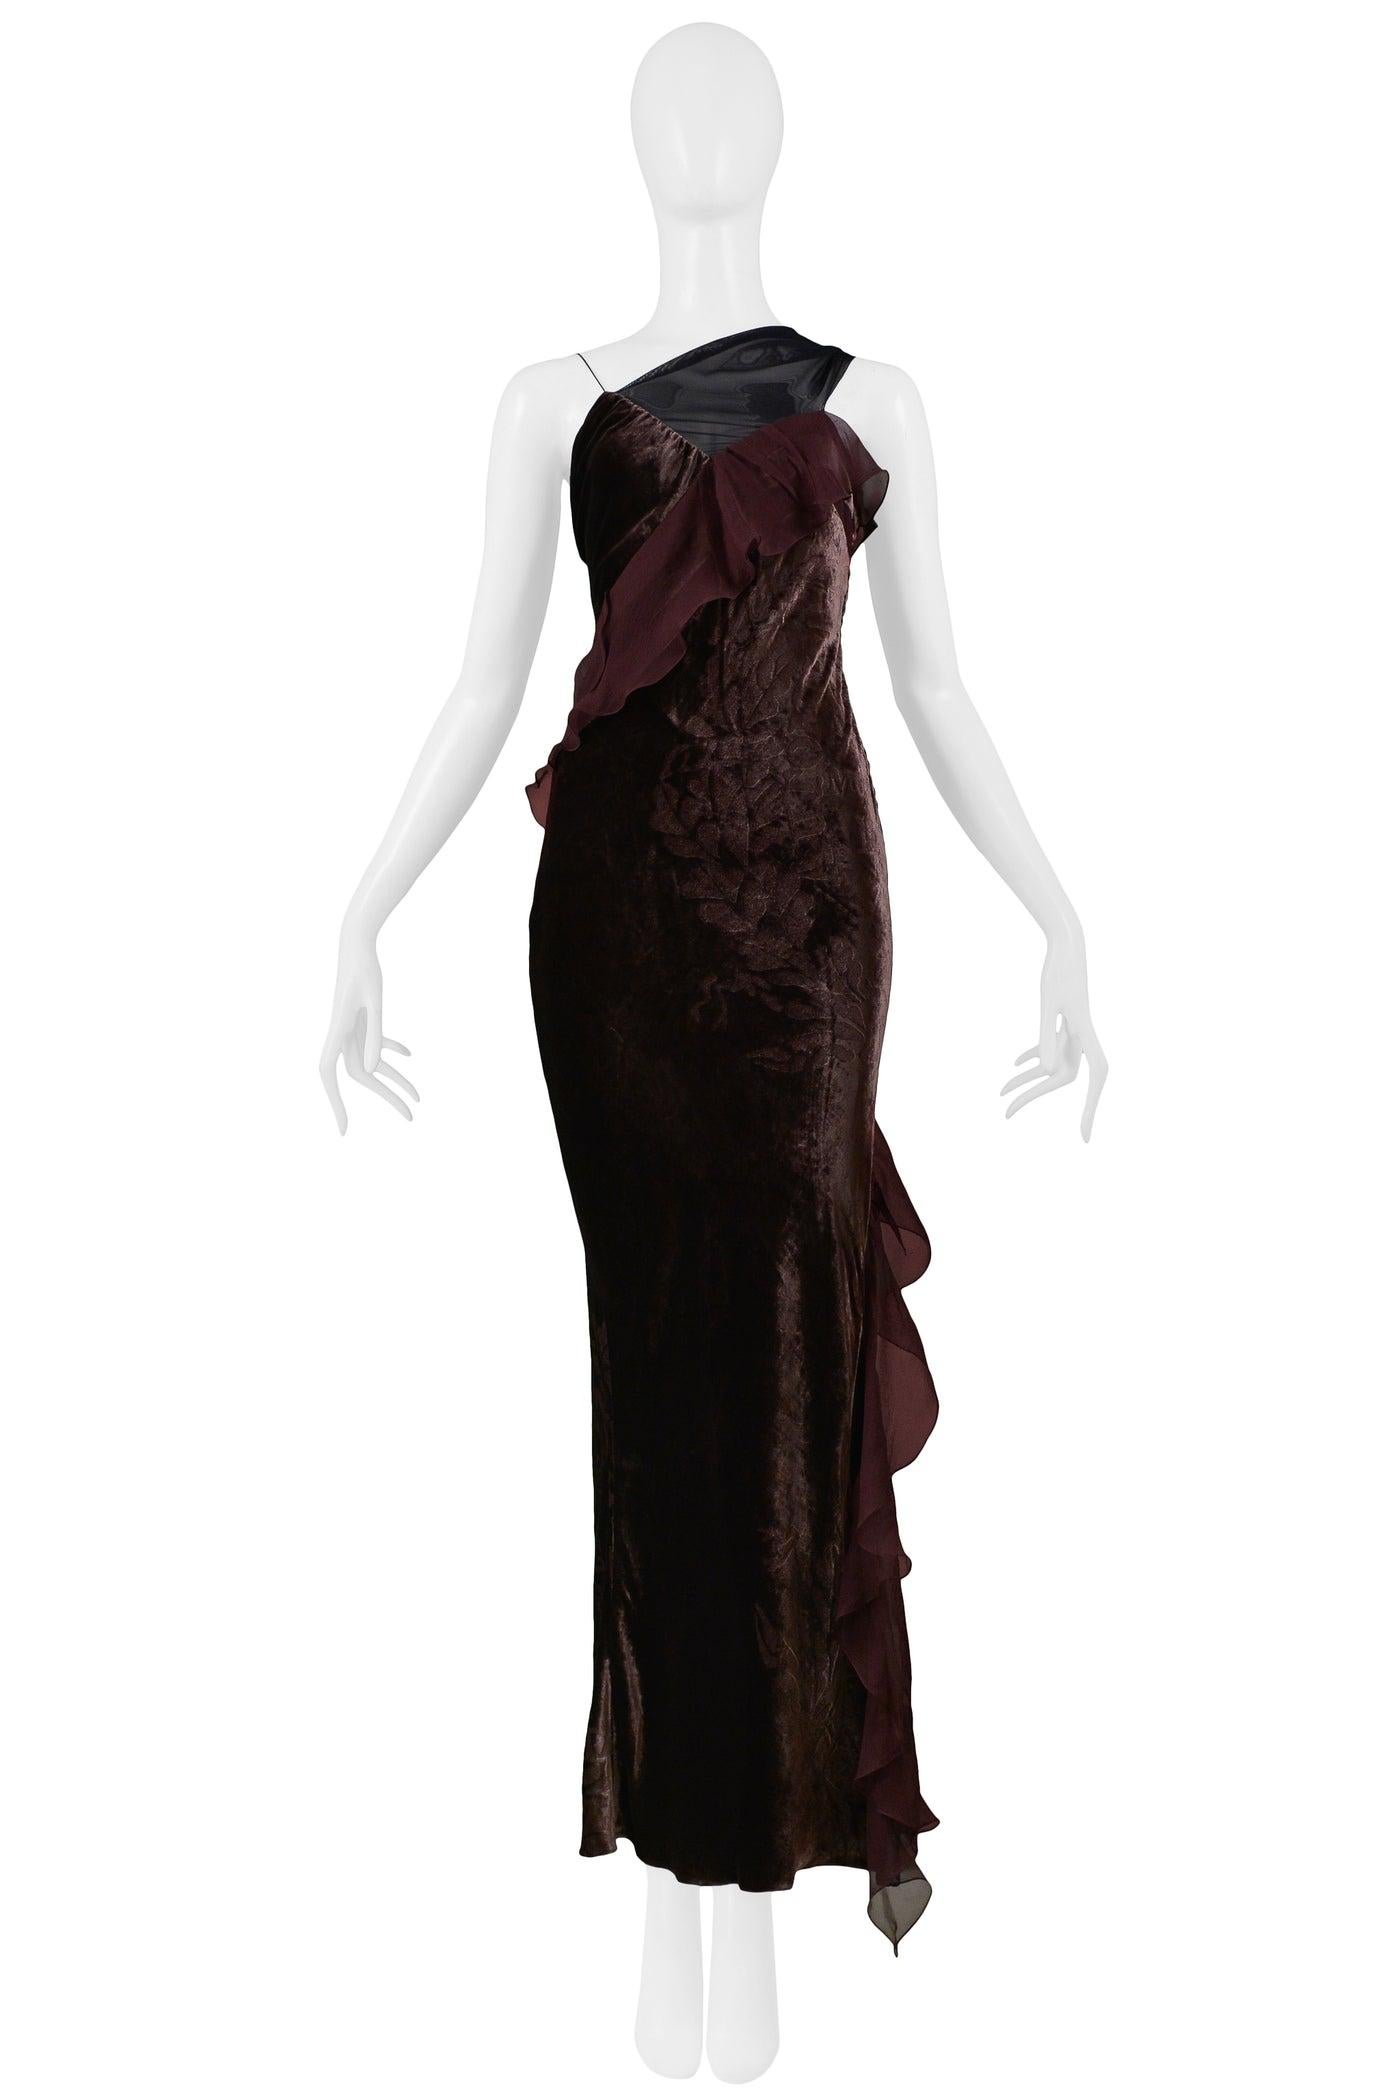 Resurrection is excited to offer this vintage Christian Dior aubergine purple floral devoré velvet gown with chiffon ruffle detail, spaghetti straps, asymmetrical sheer mesh panel at chest, and side button closure.

Christian Dior Paris
Designed by